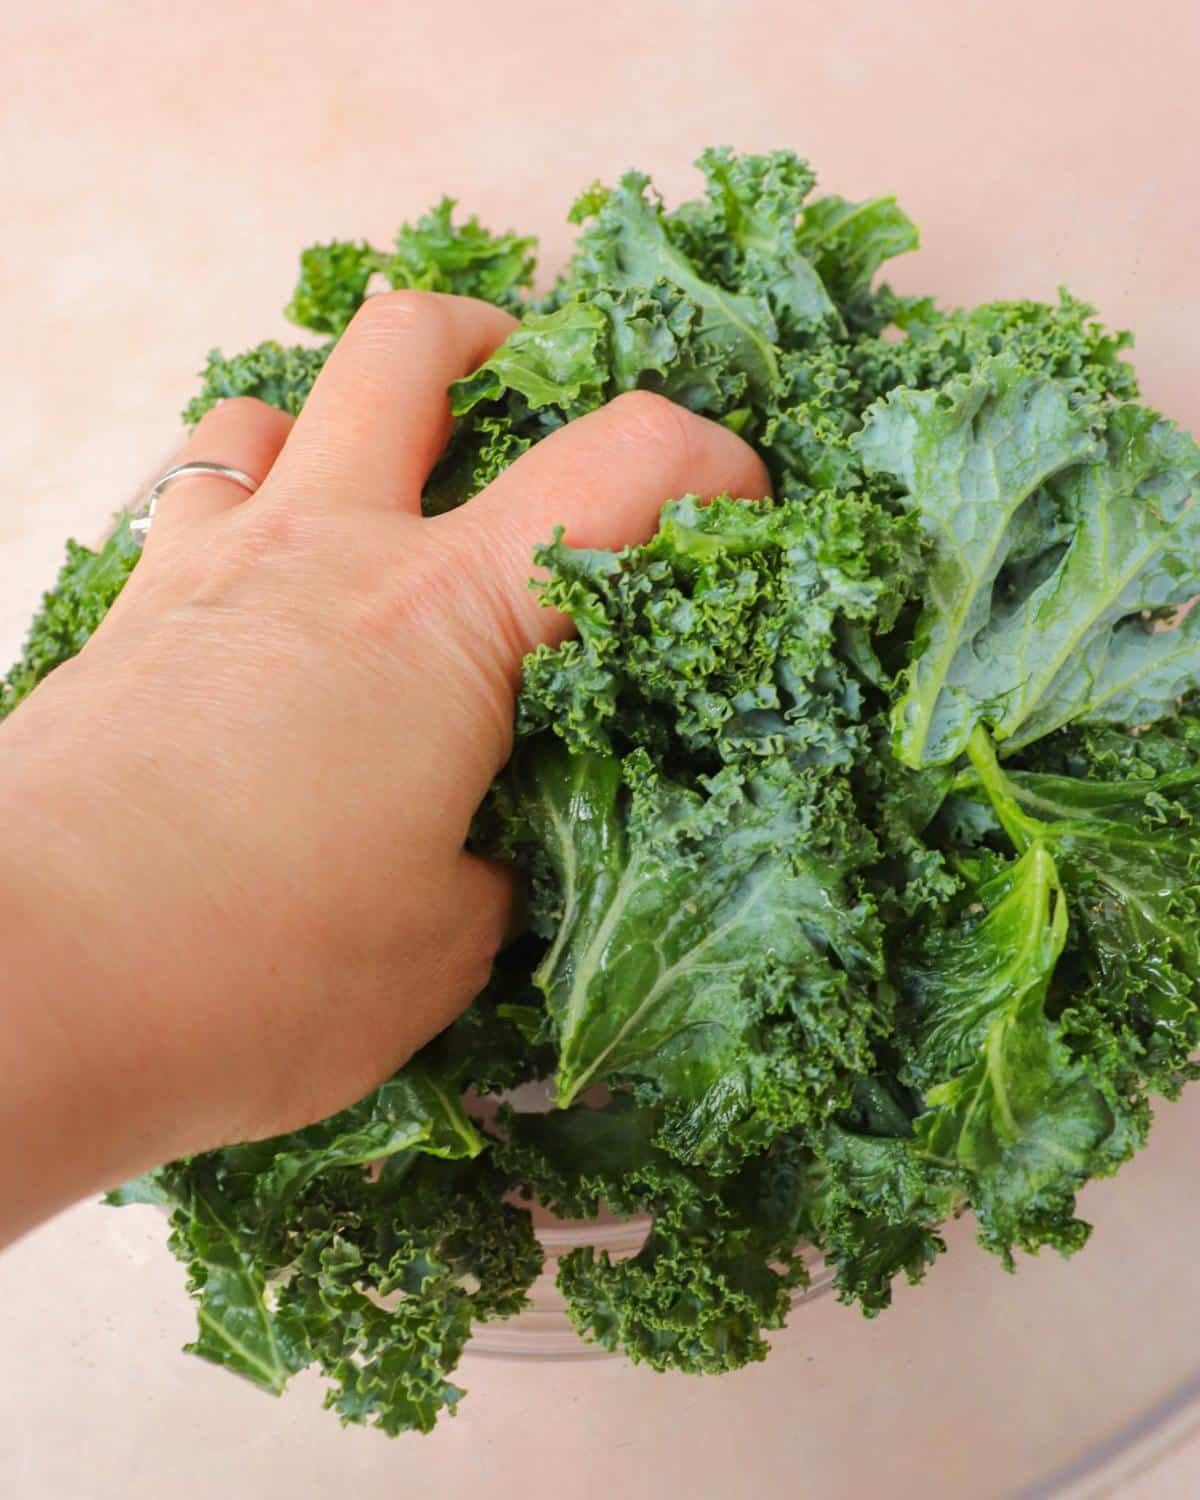 Hand massaging olive oil into kale leaves in a bowl.